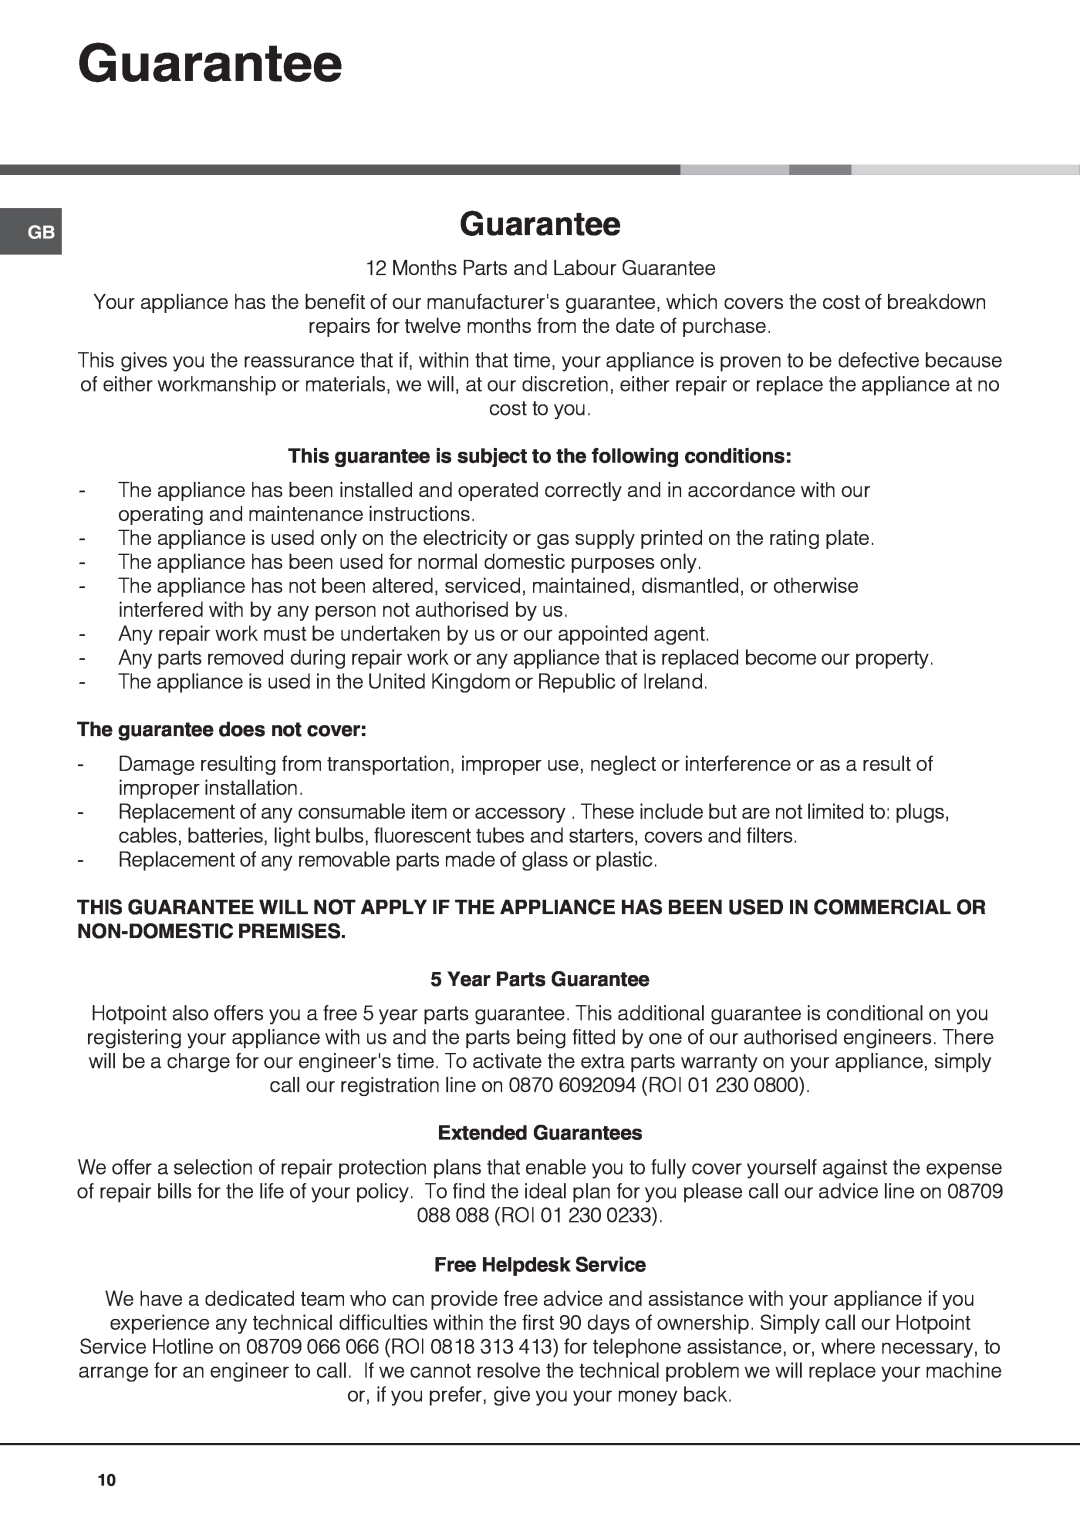 Hotpoint FFB6200AX manual Guarantee, This guarantee is subject to the following conditions, The guarantee does not cover 